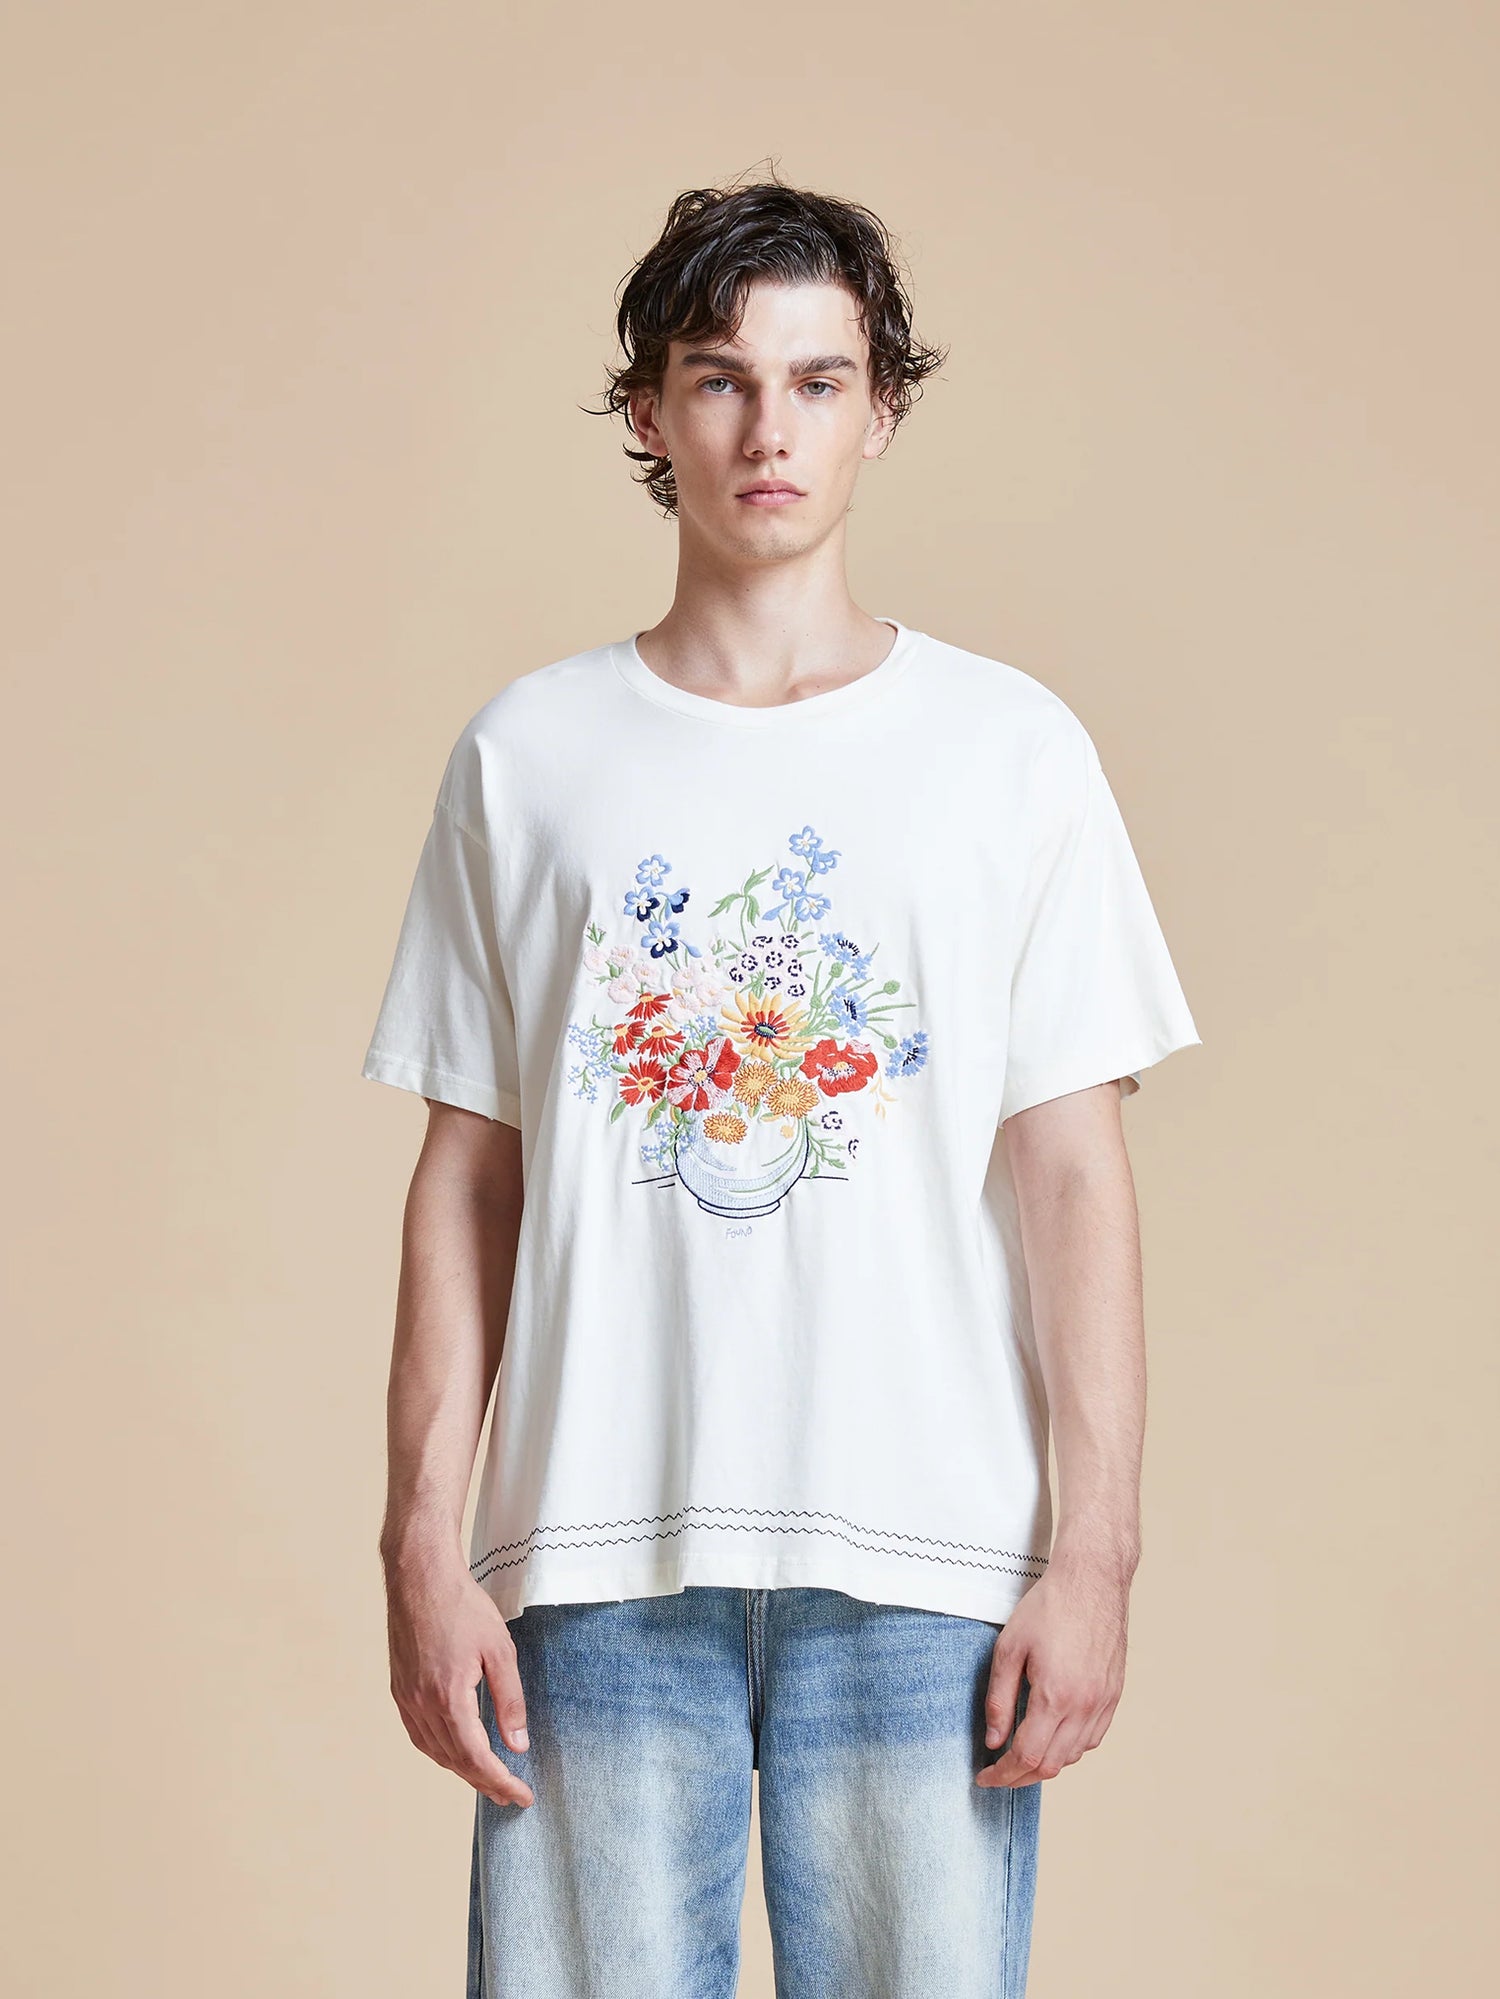 A man wearing a white Bouquet Flowers Tee from Found, showcasing traditional Phulkari embroidery from Punjab.